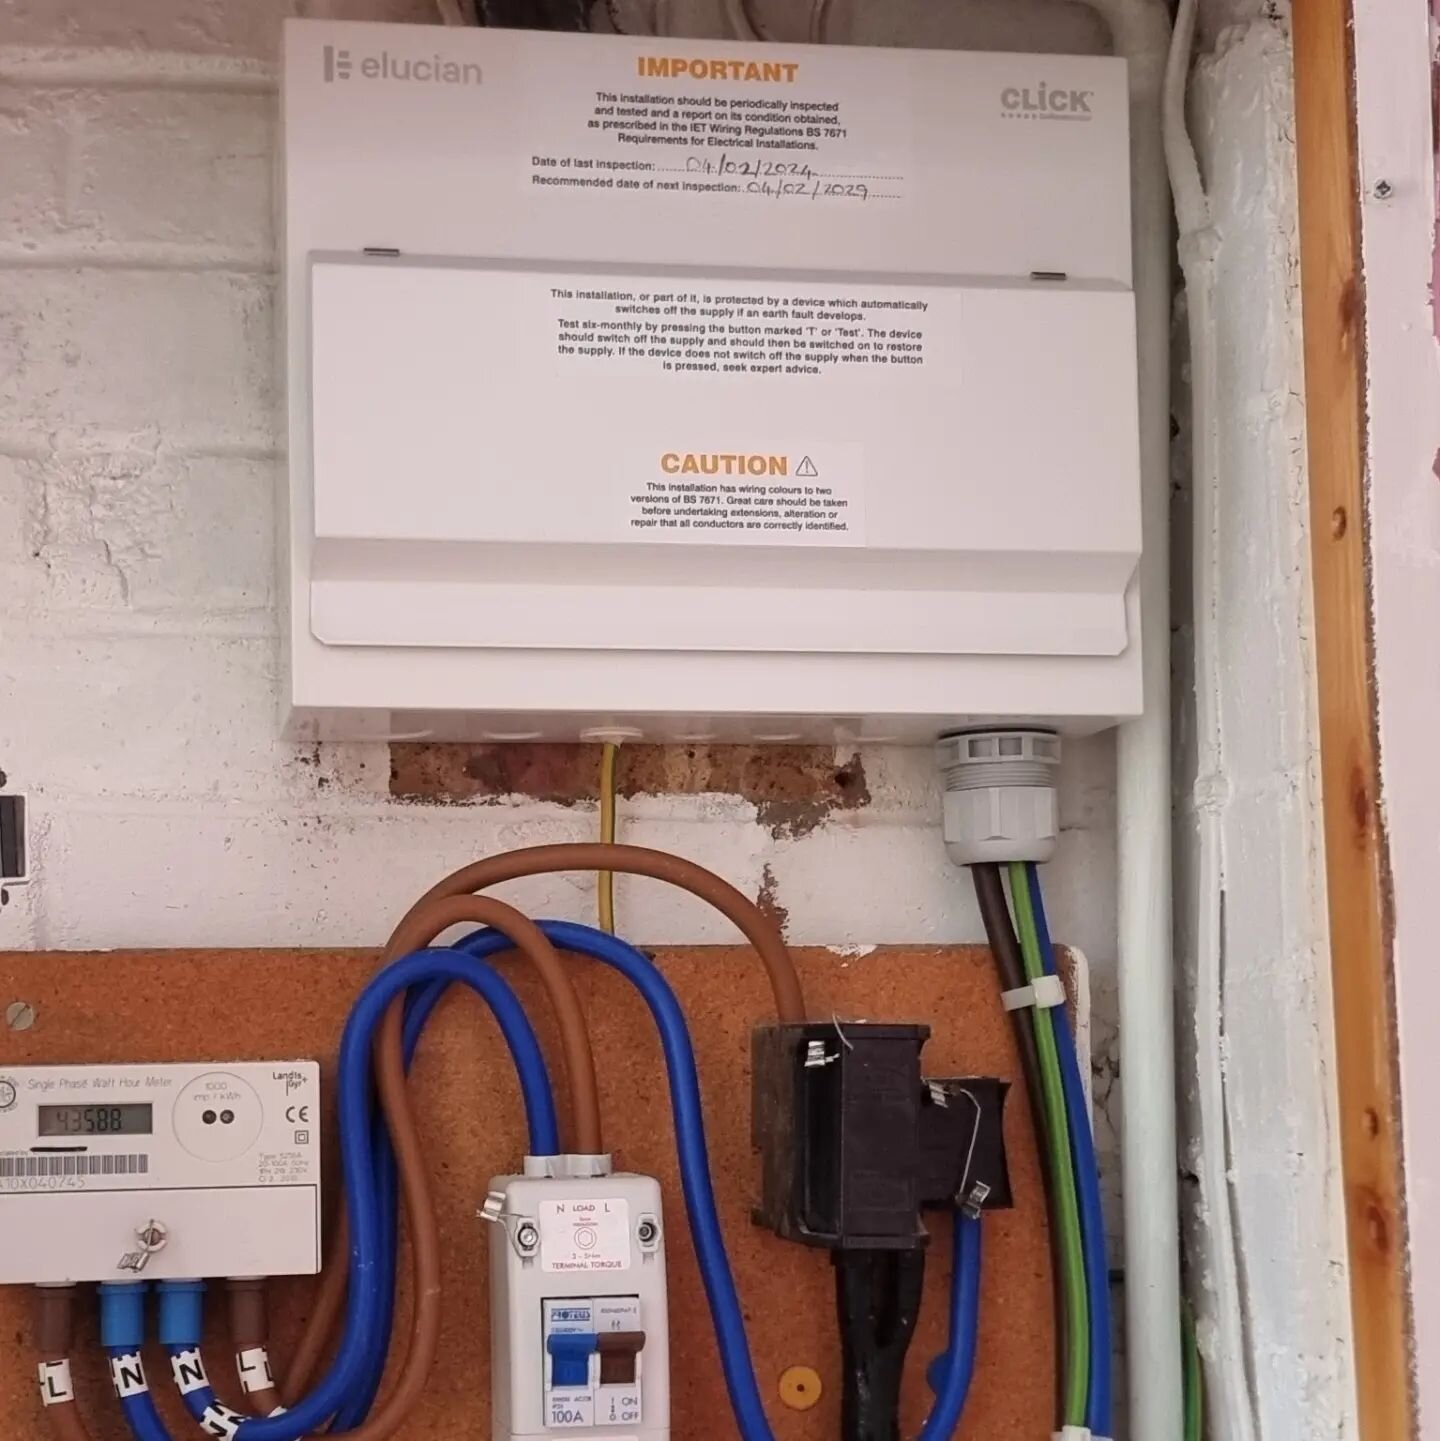 New consumer unit upgrade with RCBO's and surge protection to bring this installation in line with current regulations.